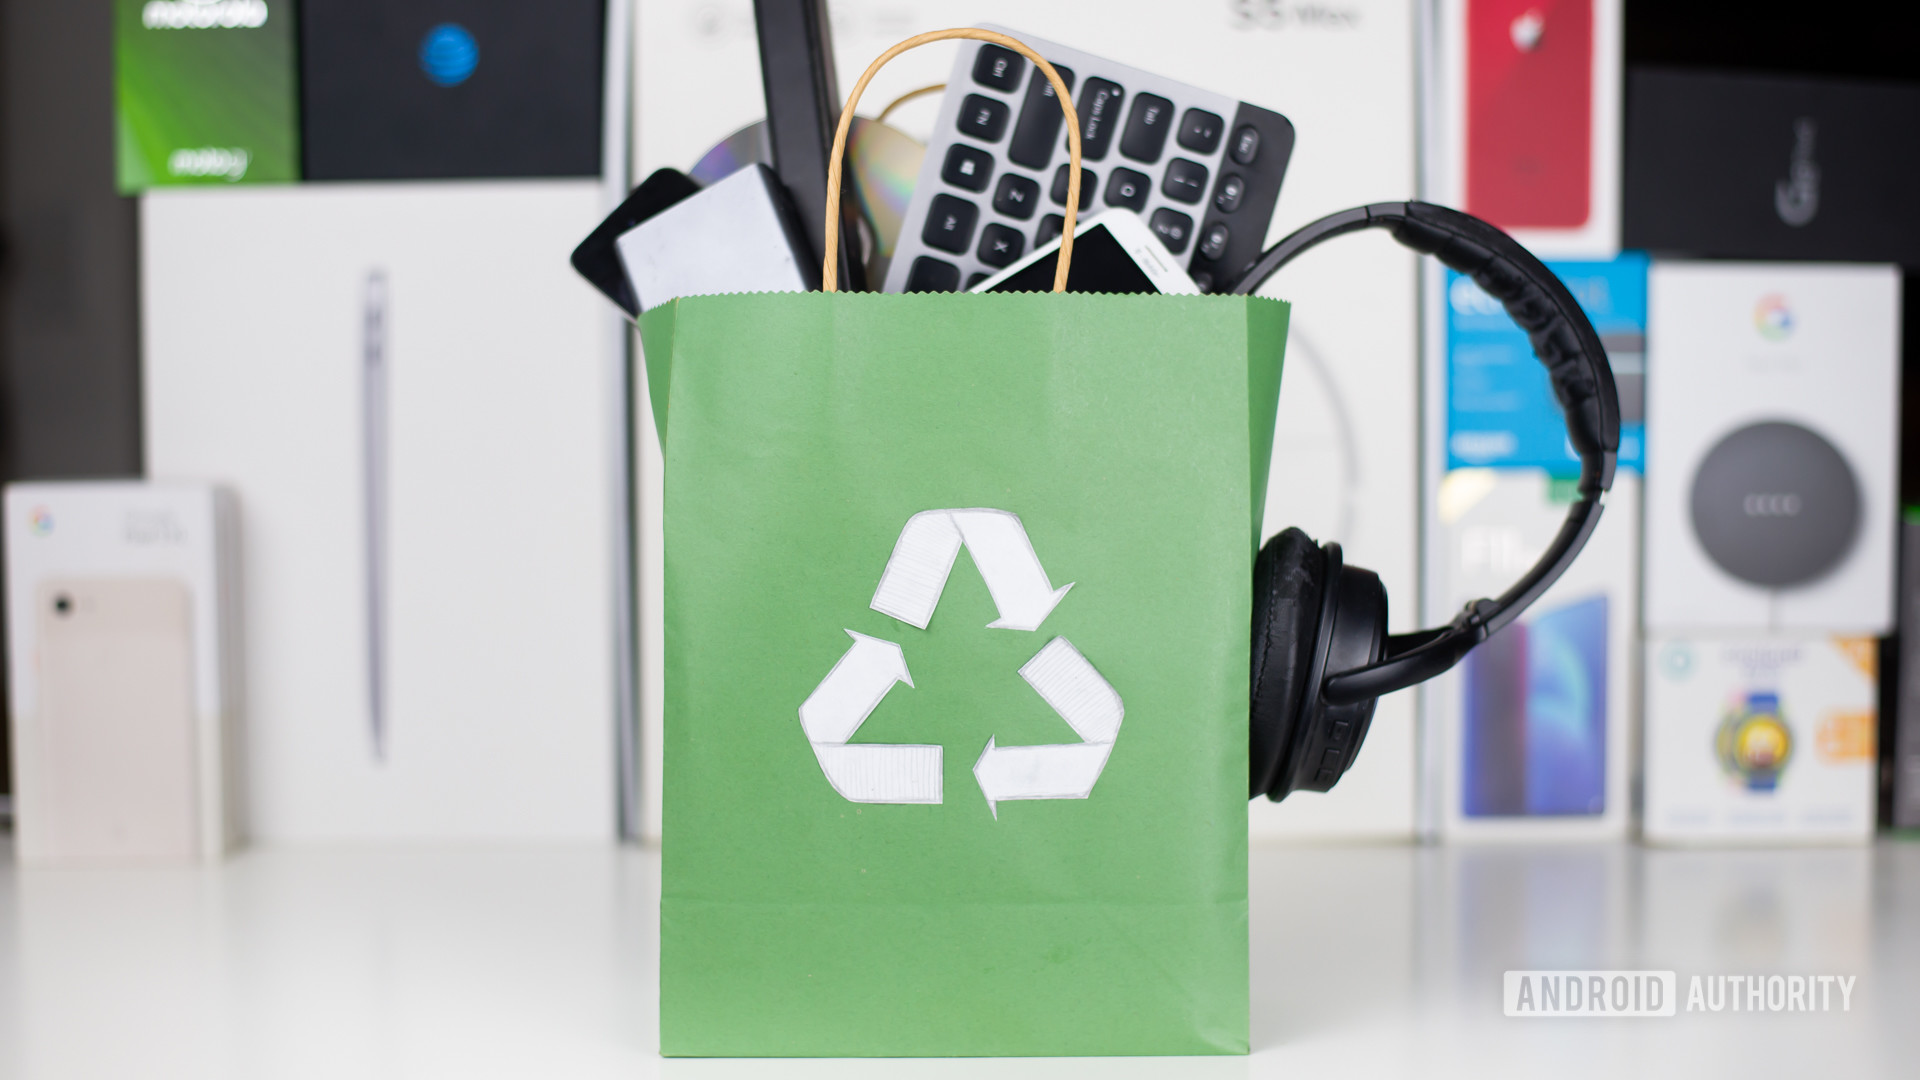 Old electronics stuffed into a green paper bag with a white recyling symbol on it in front of electronic device boxes.